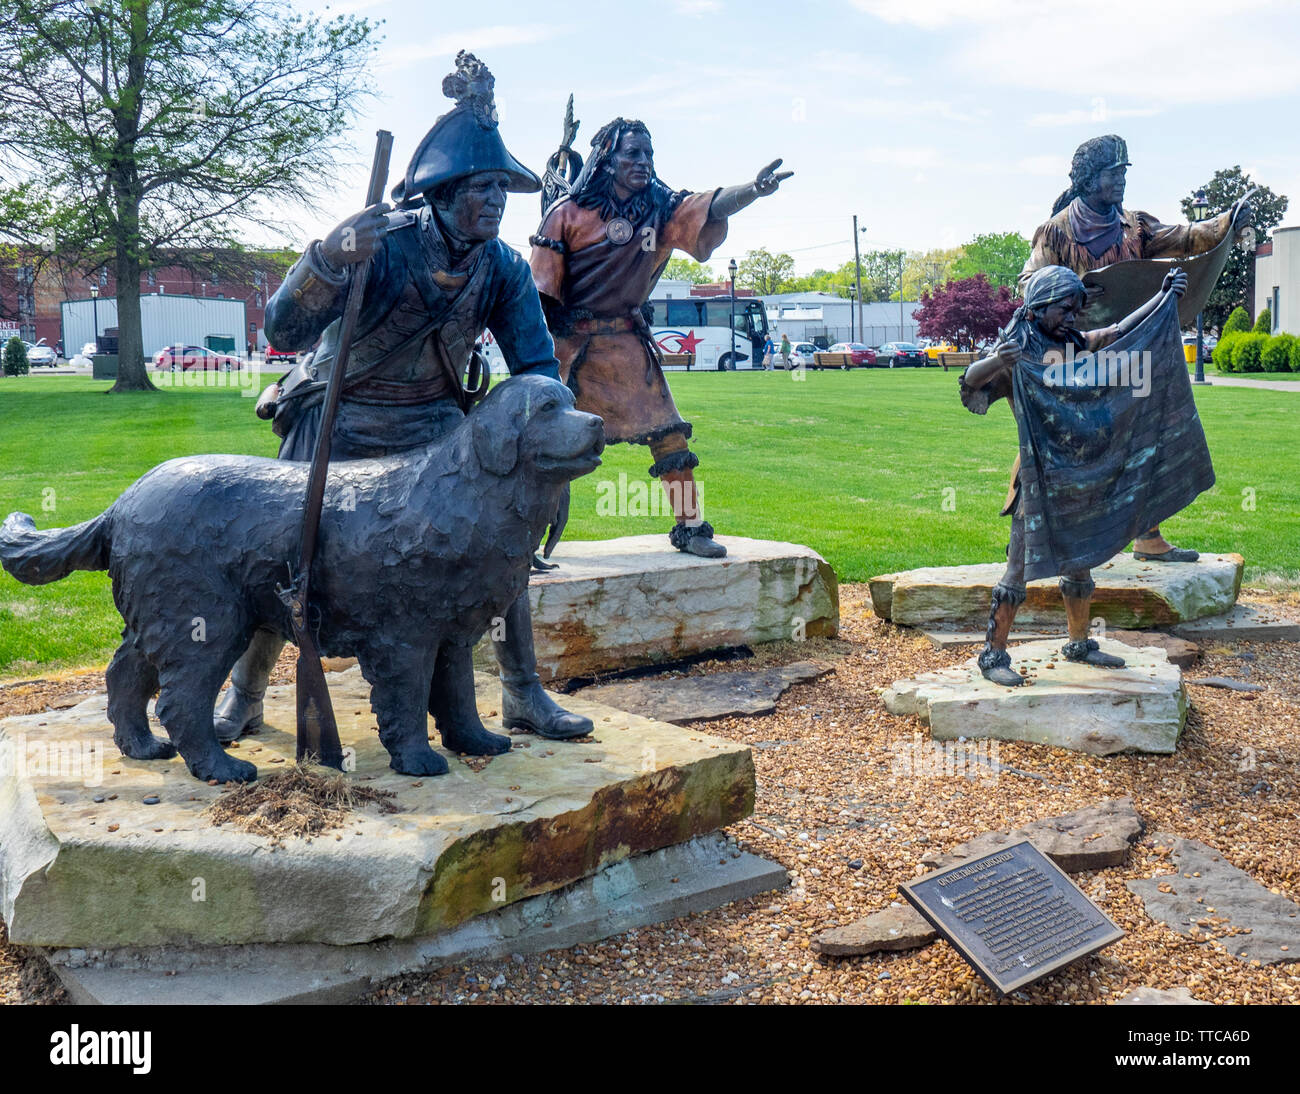 On the Trail of Discovery sculpture by George Lundeen depicting Meriwether Lewis, William Clark a native American man and girl, Paducah  Kentucky USA Stock Photo